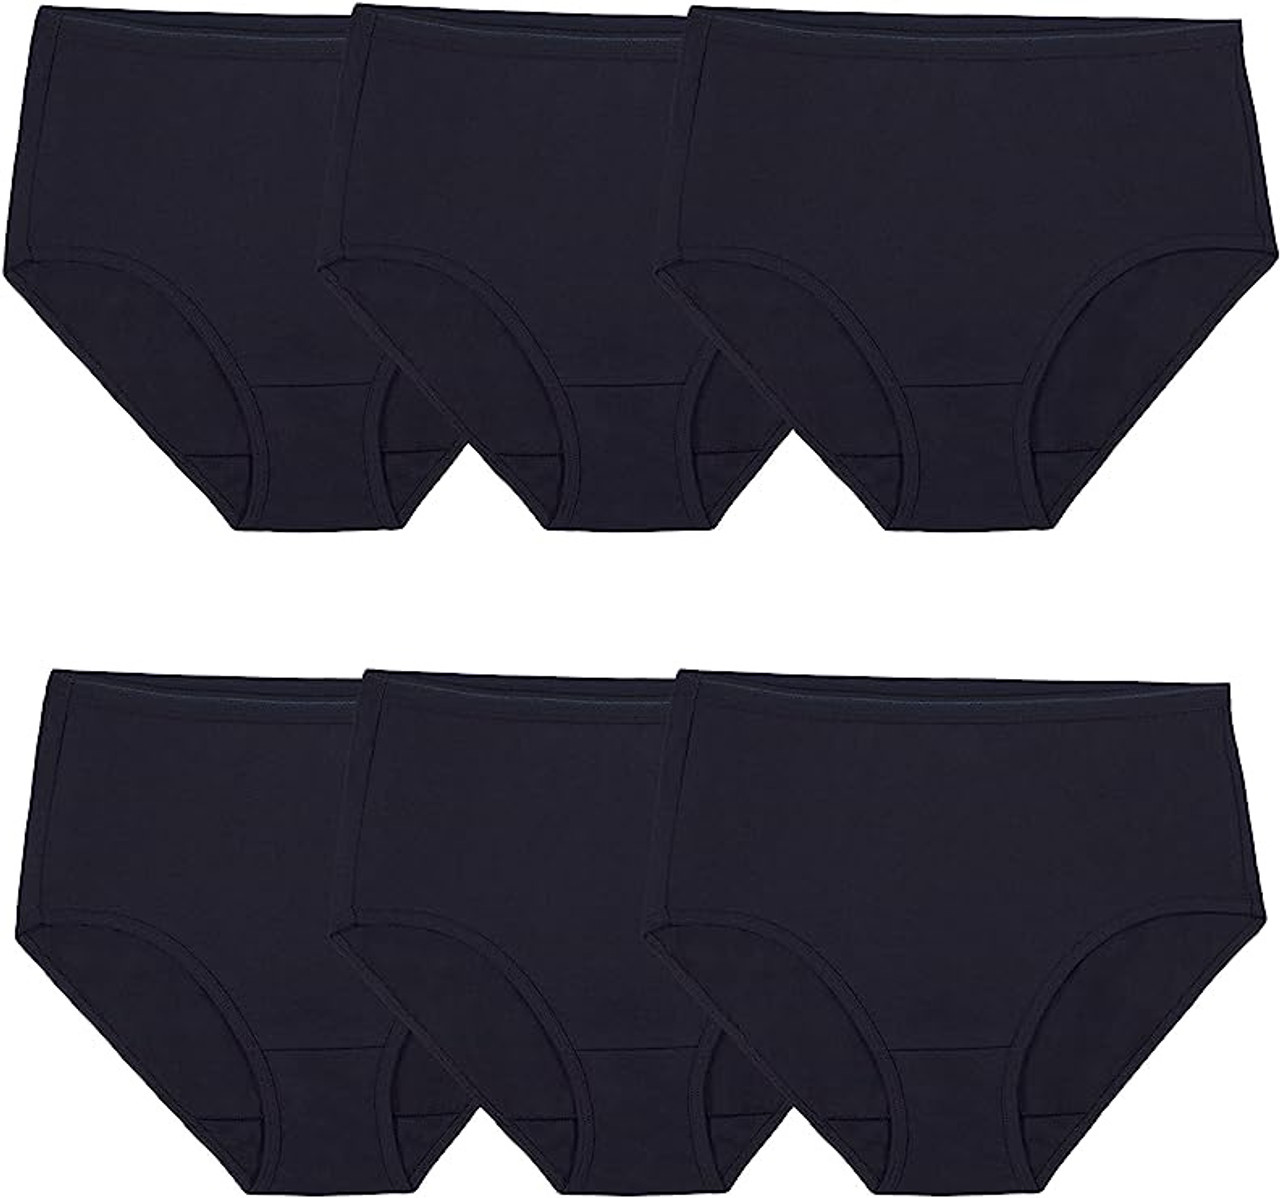 Women Underwear Fruit of the Loom 6 pack Cotton Black - A. Ally & Sons